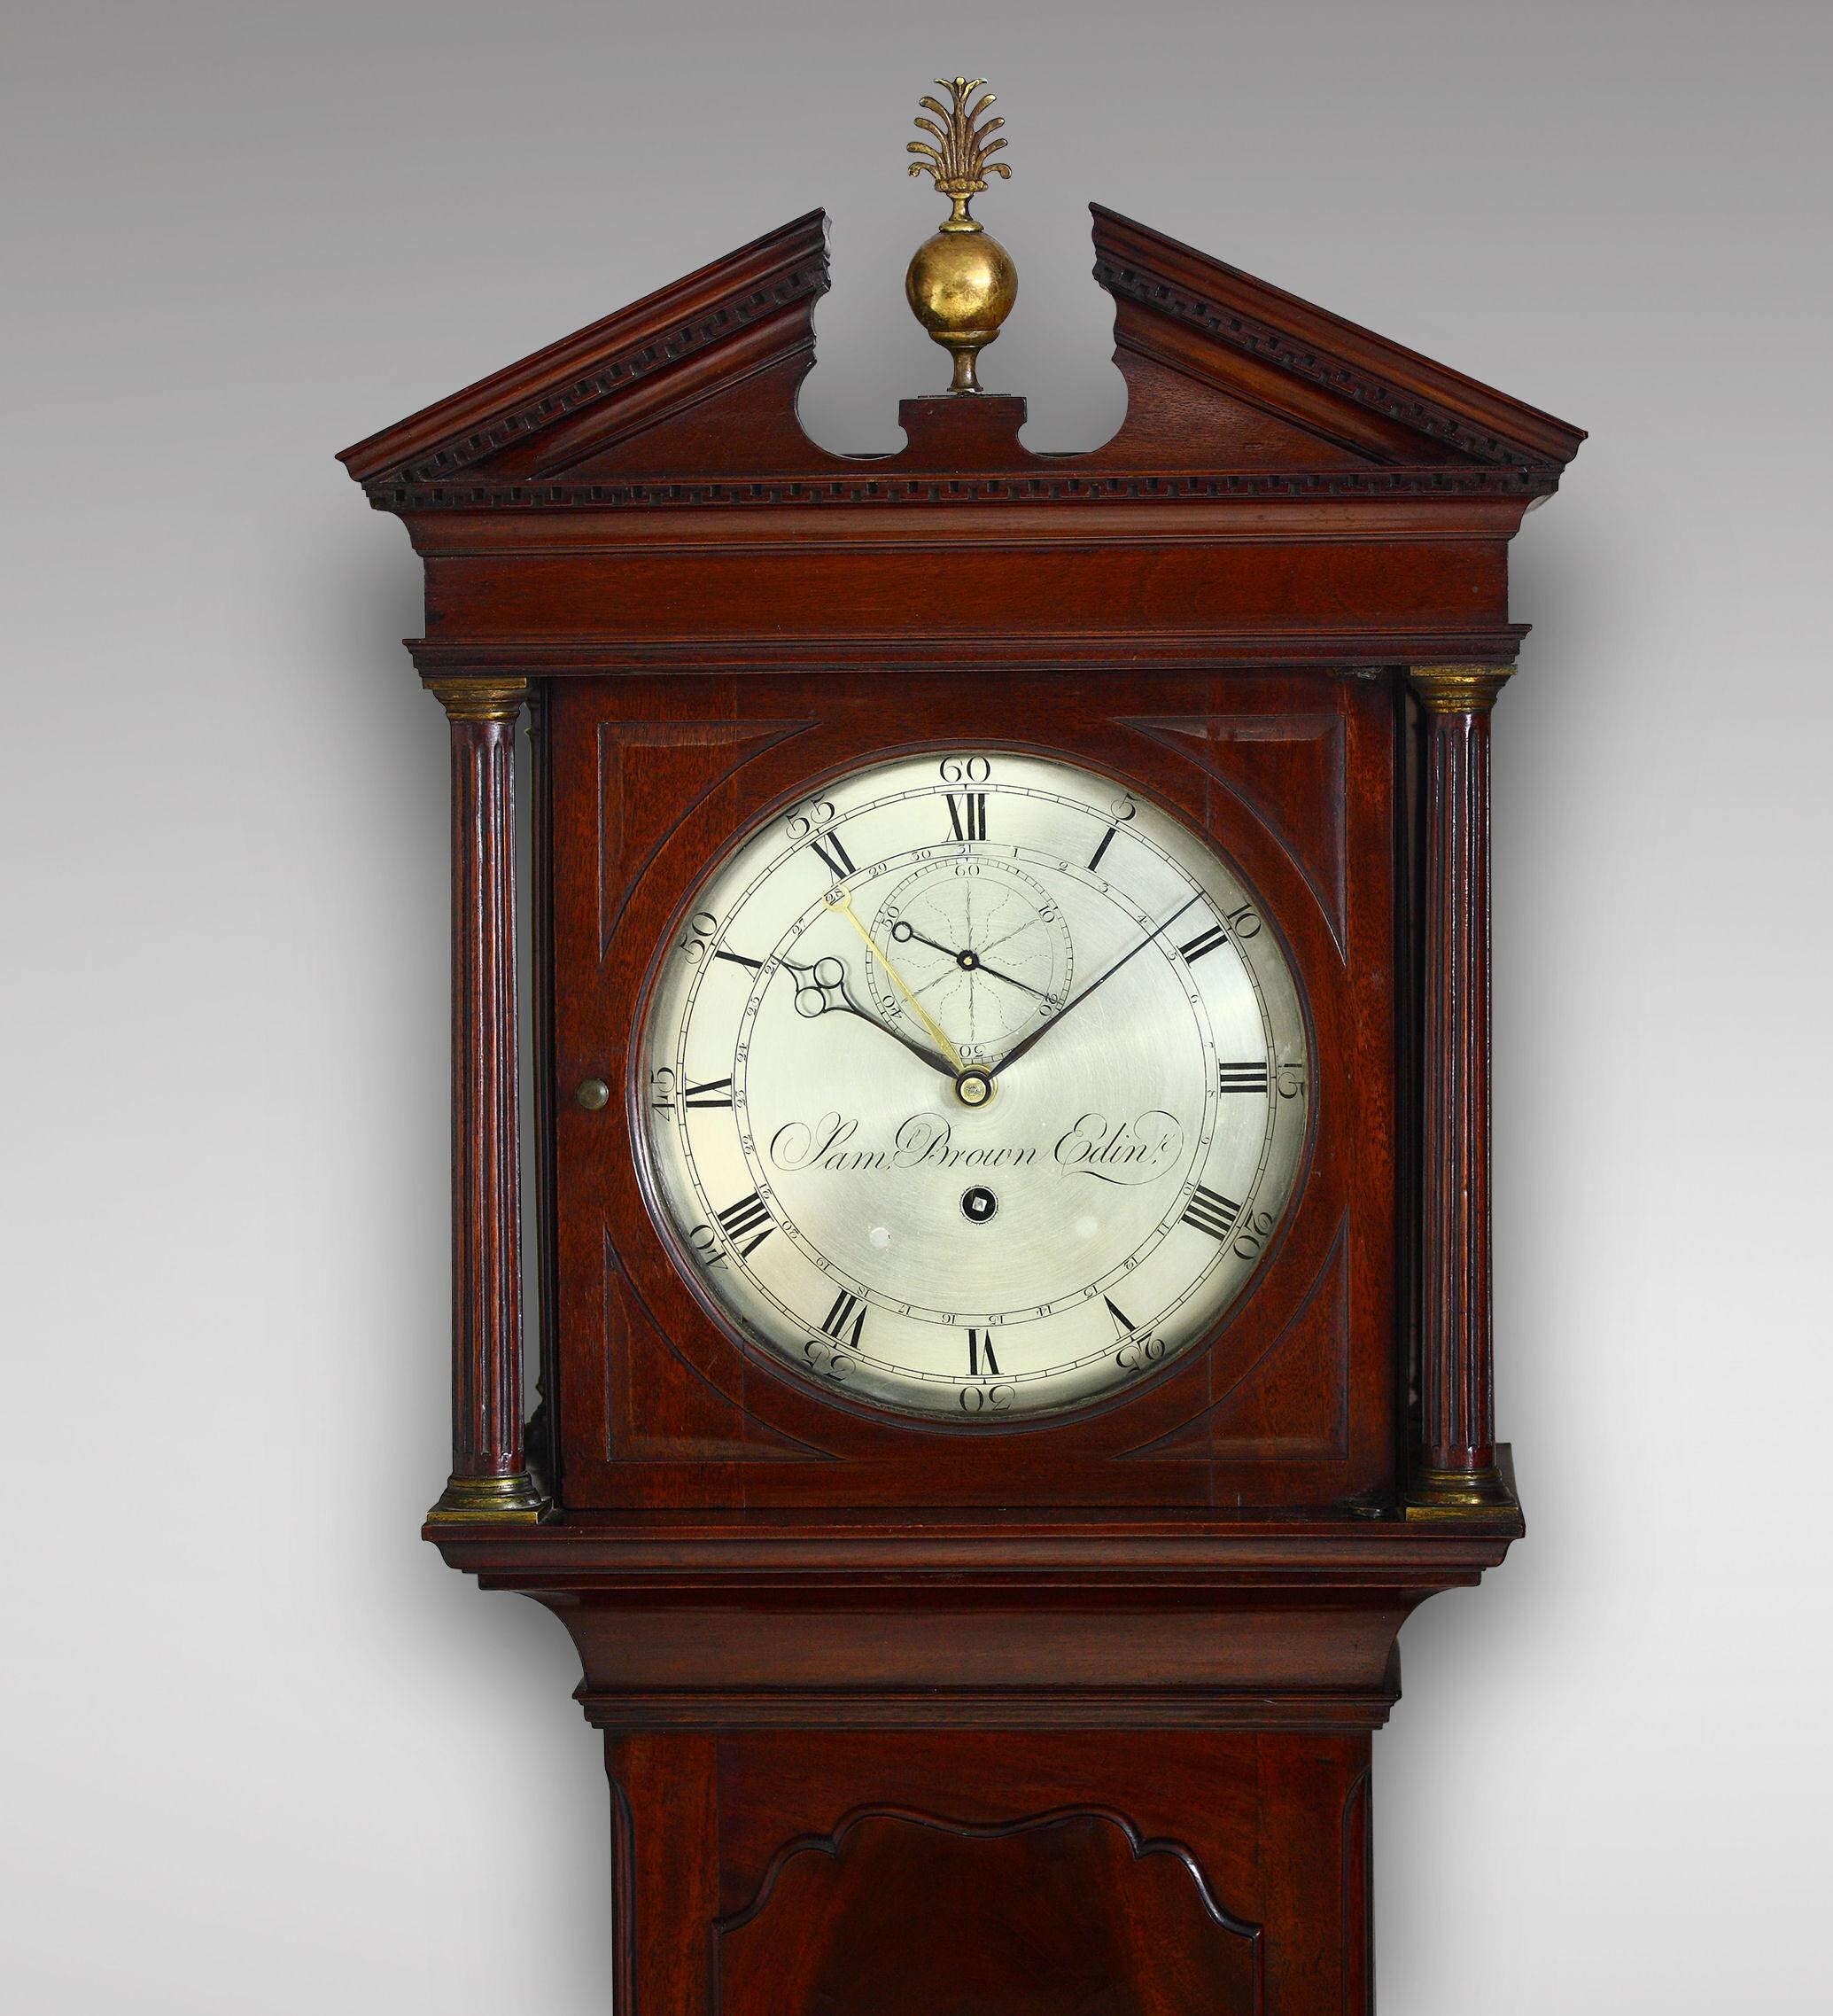 Scottish floor standing regulator of small size, circa 1780, circular silvered brass dial with Arabic numerals for the five minutes and Roman numerals for the hours, an inner circle marking the days of the month also with Arabic numerals. Blued